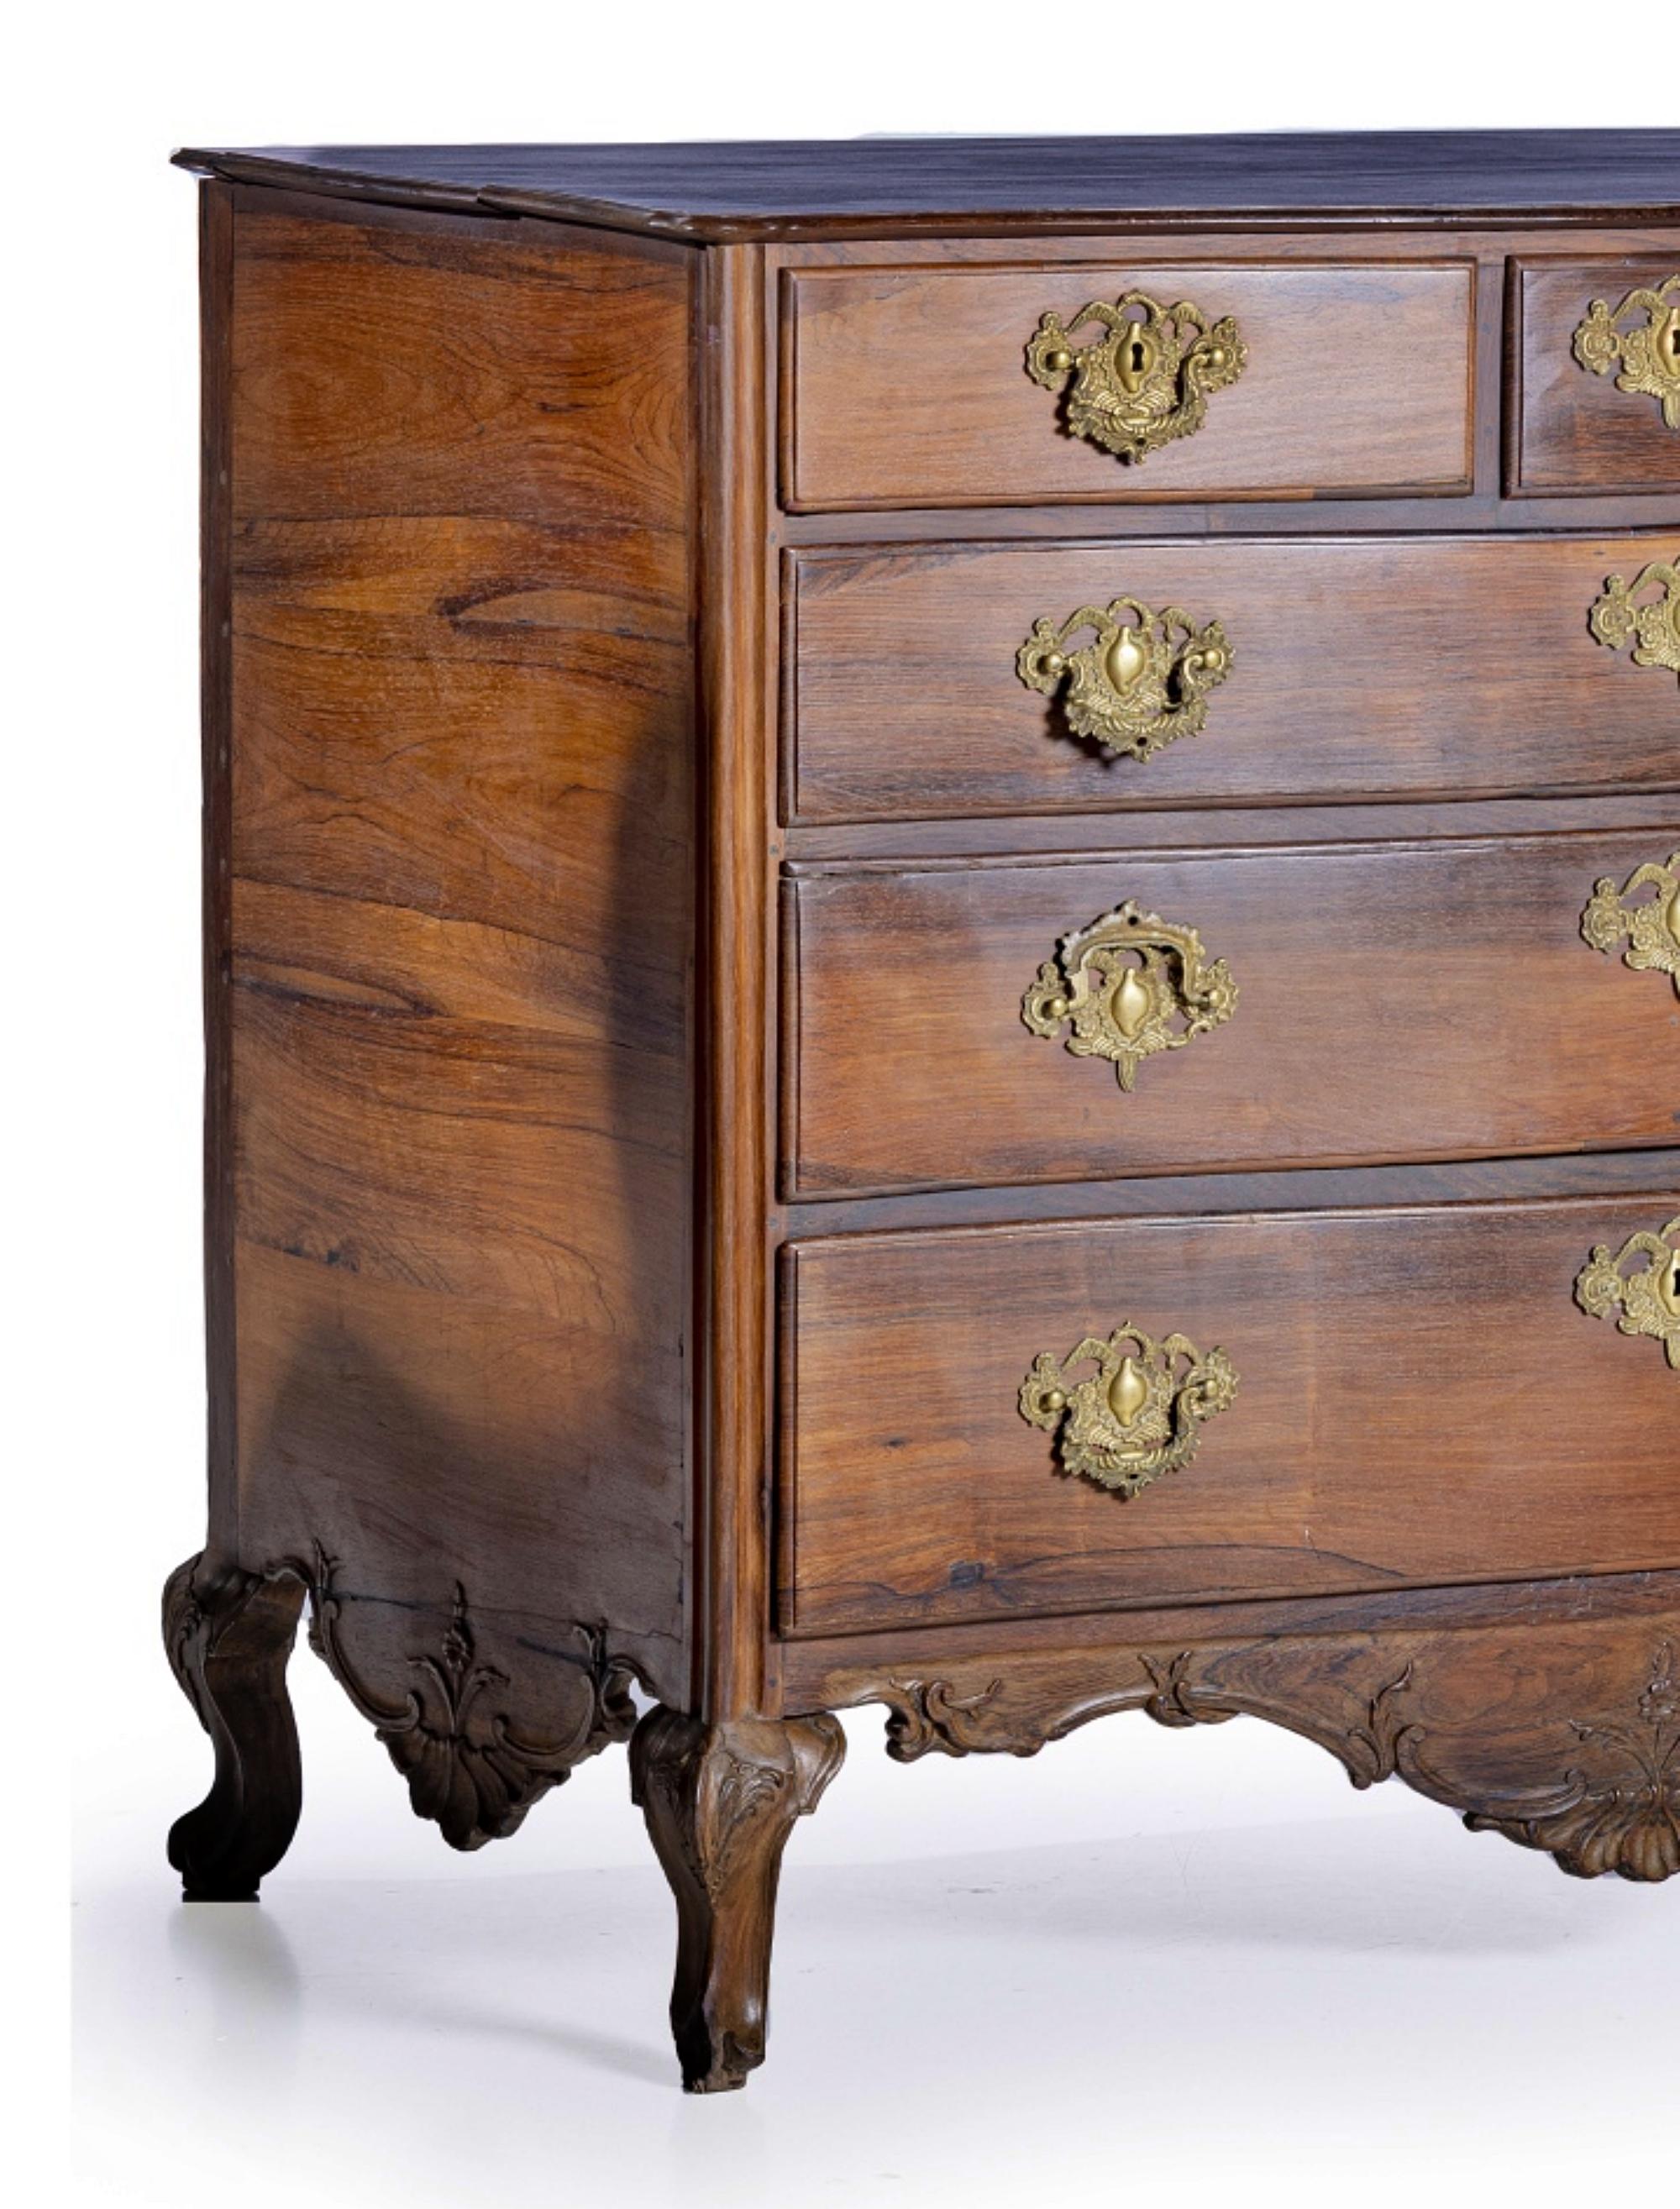 Hand-Crafted Important Portuguese Commode 18th Century in Rosewood